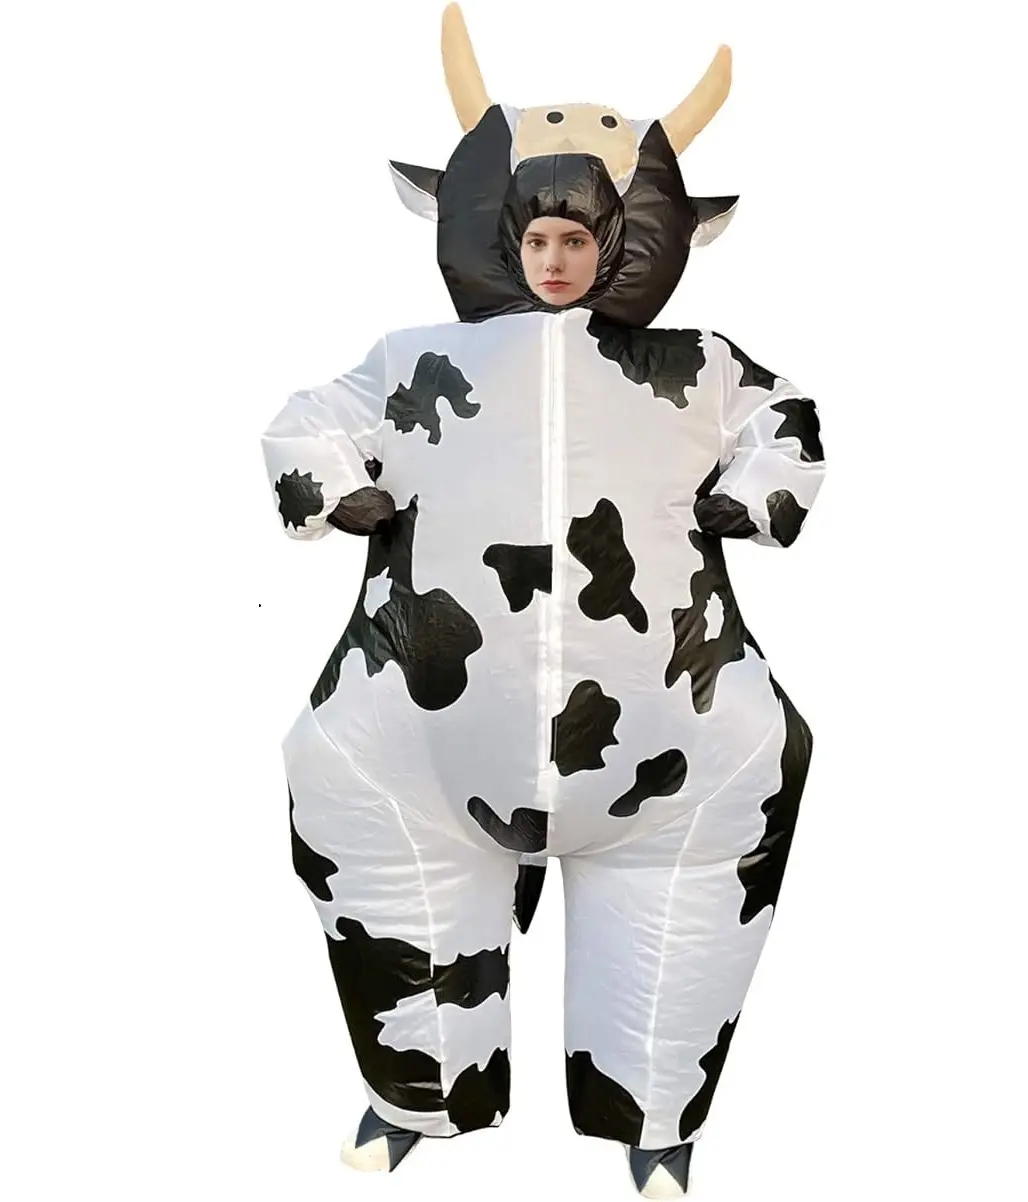 Inflatable Cow Costume for Women Funny Blow up Costume for Cosplay Party Festival Halloween Costume